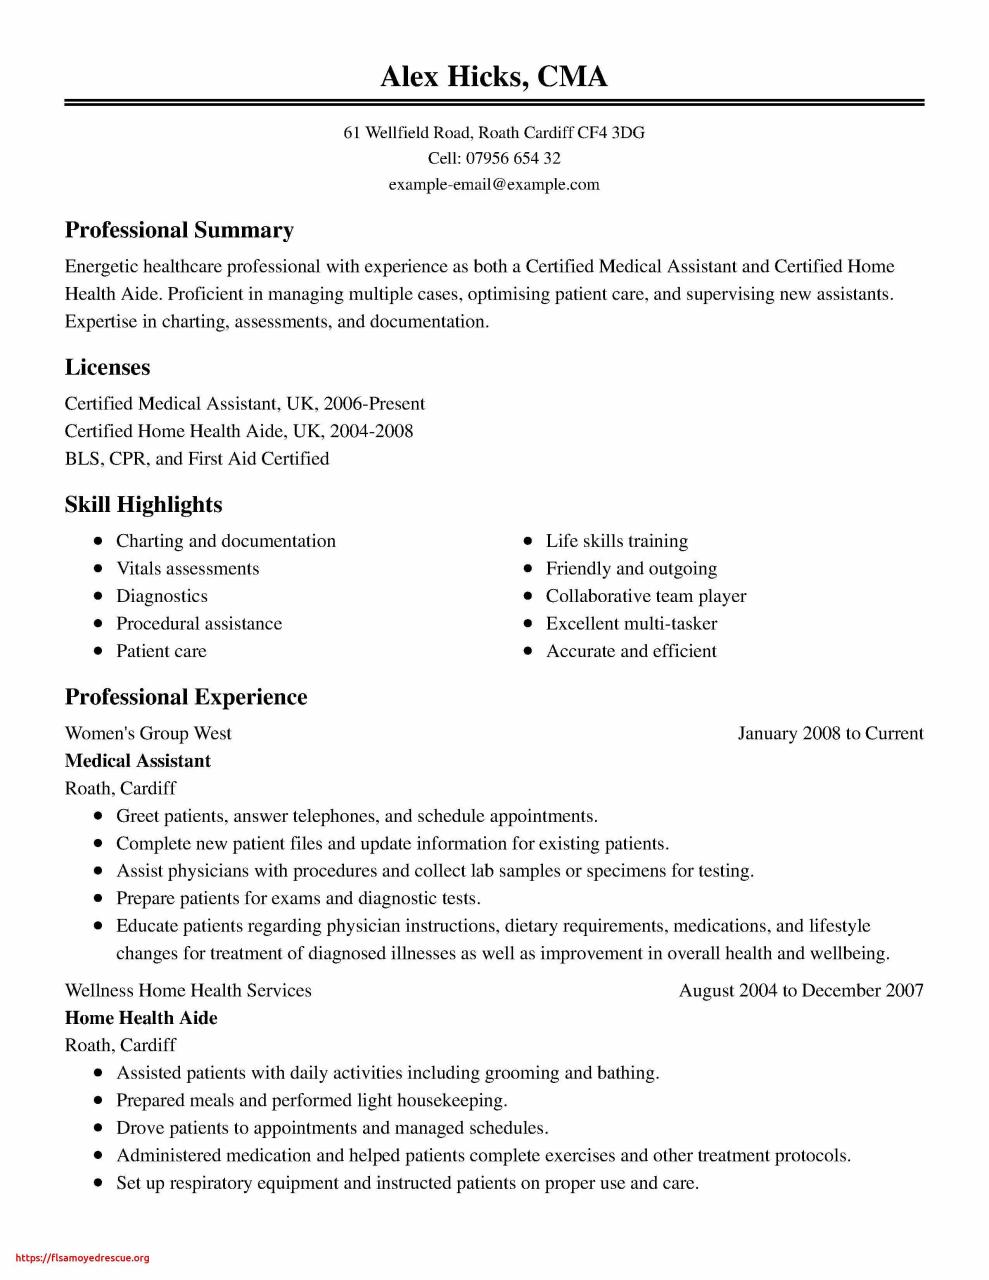 How To Write A Personal Summary On A Resume